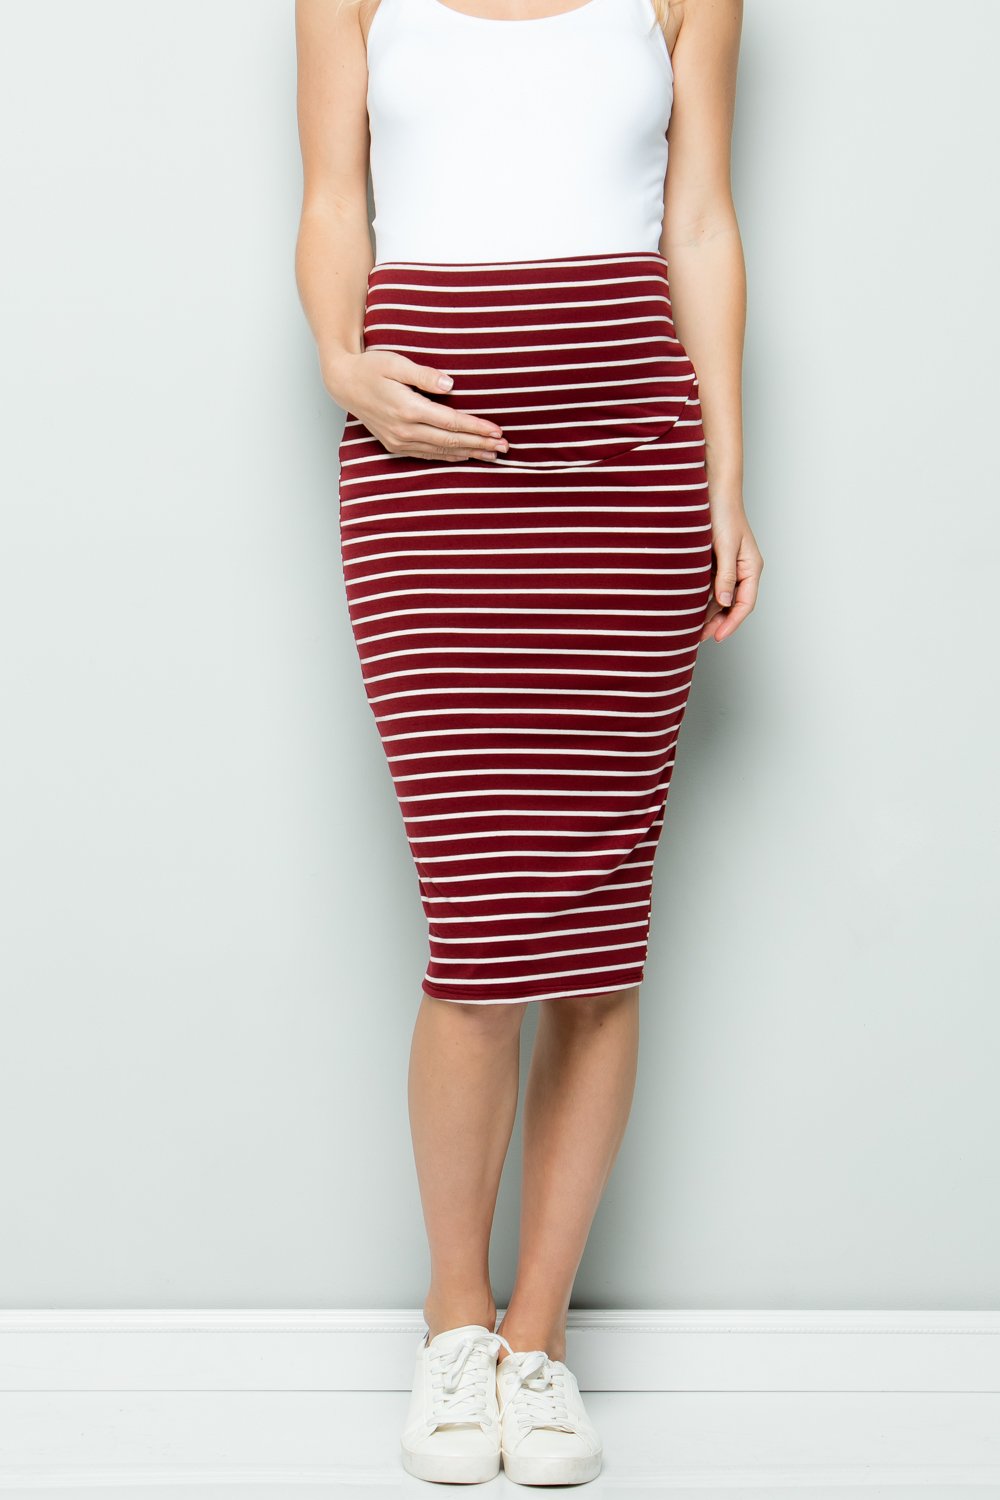 maternity pregnancy baby shower pencil midi spring summer fall casual daily bodycon skirt